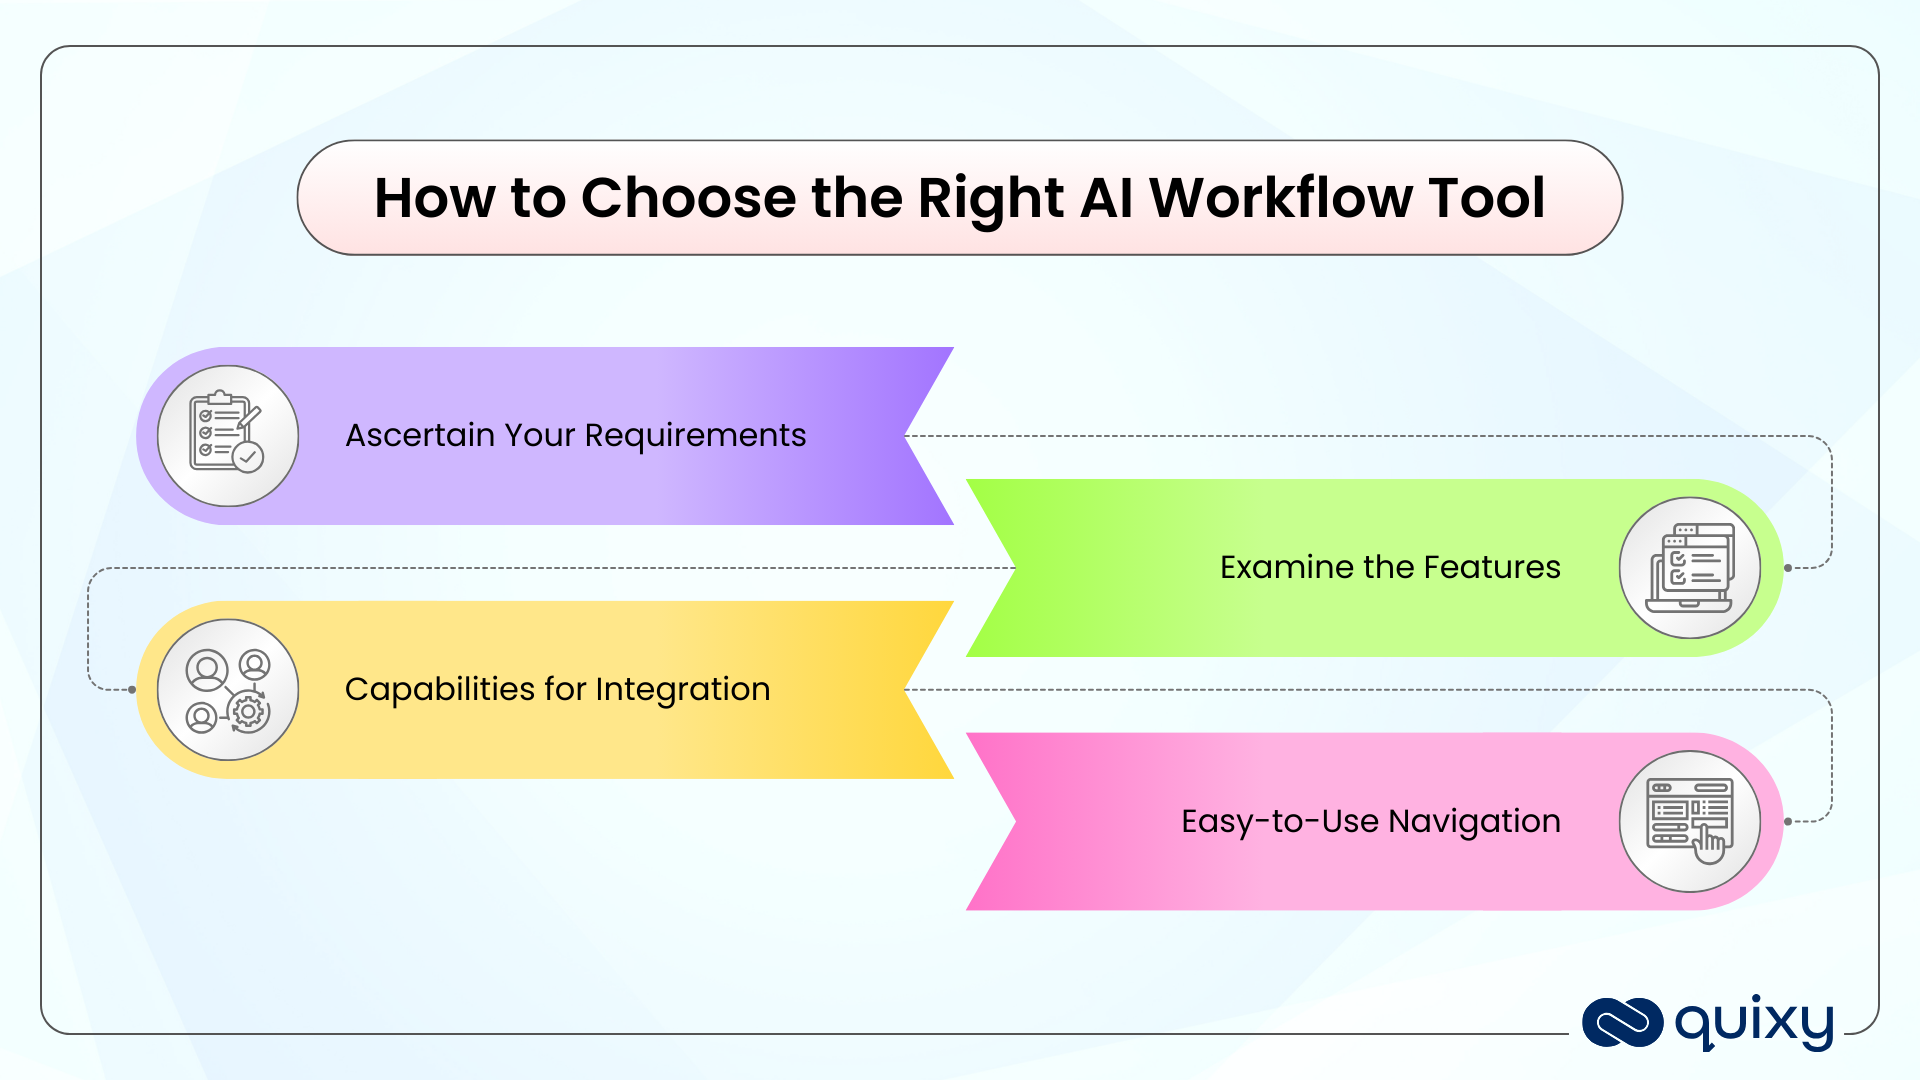 How to Choose the Right AI Workflow Tool